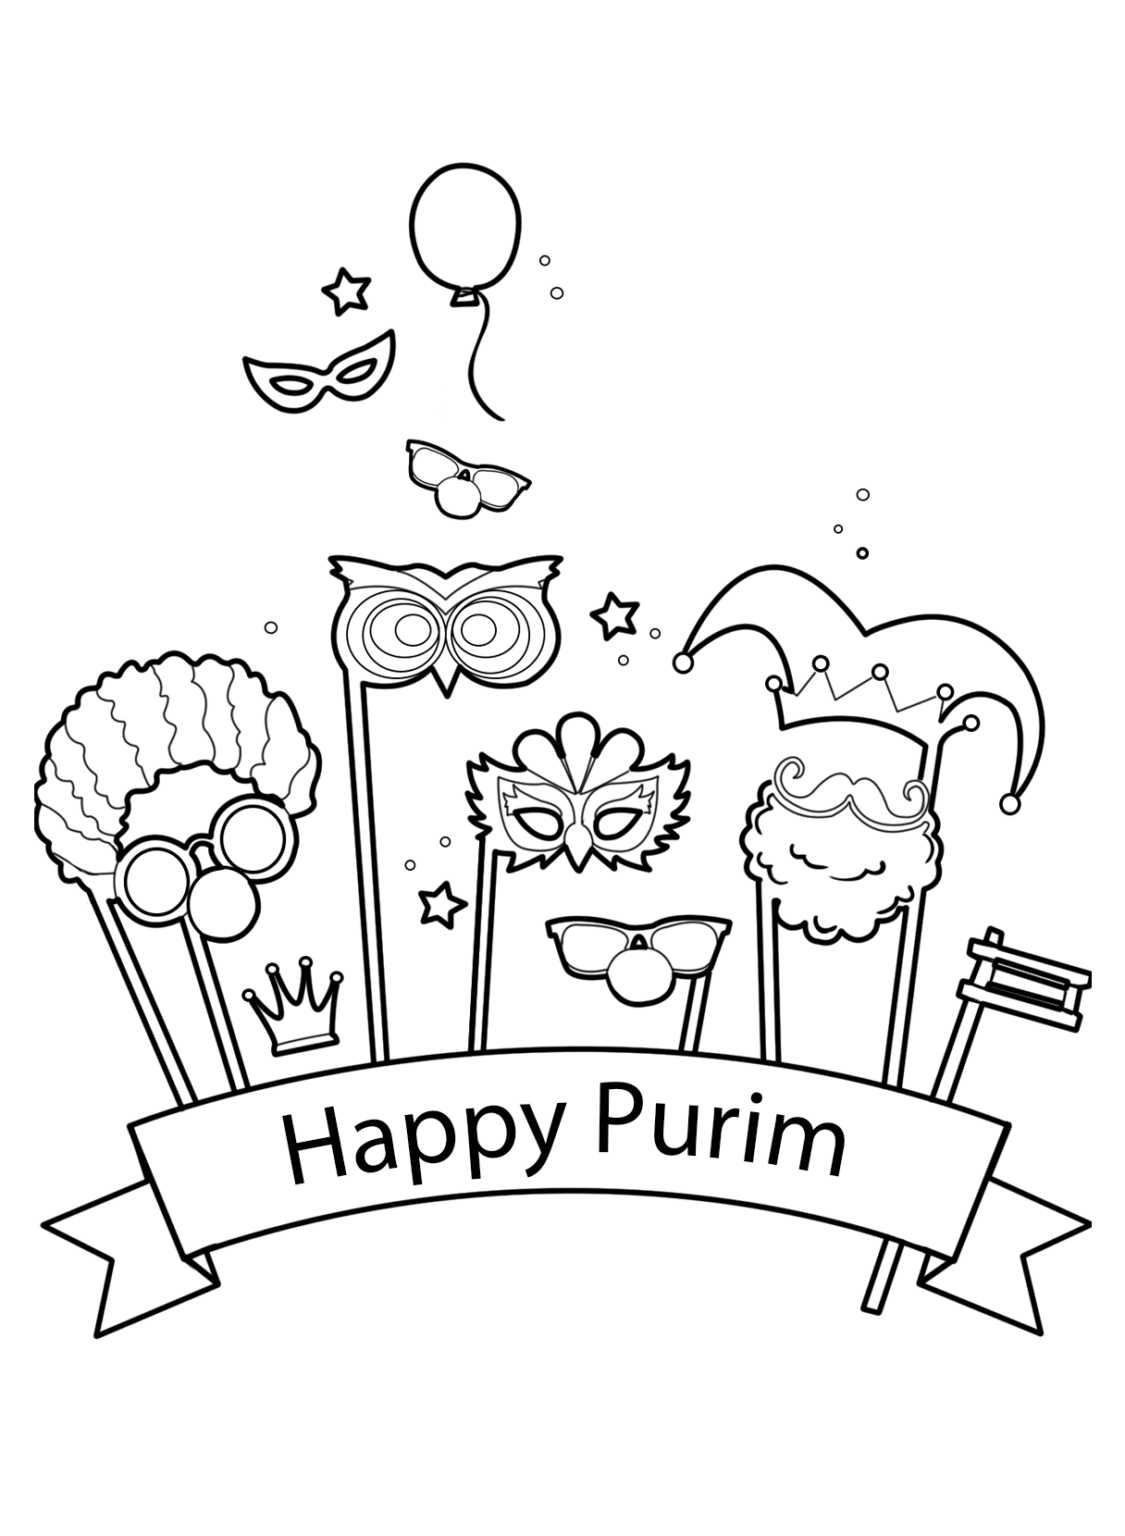 Free Purim Coloring Pages Pdf Coloringfolder